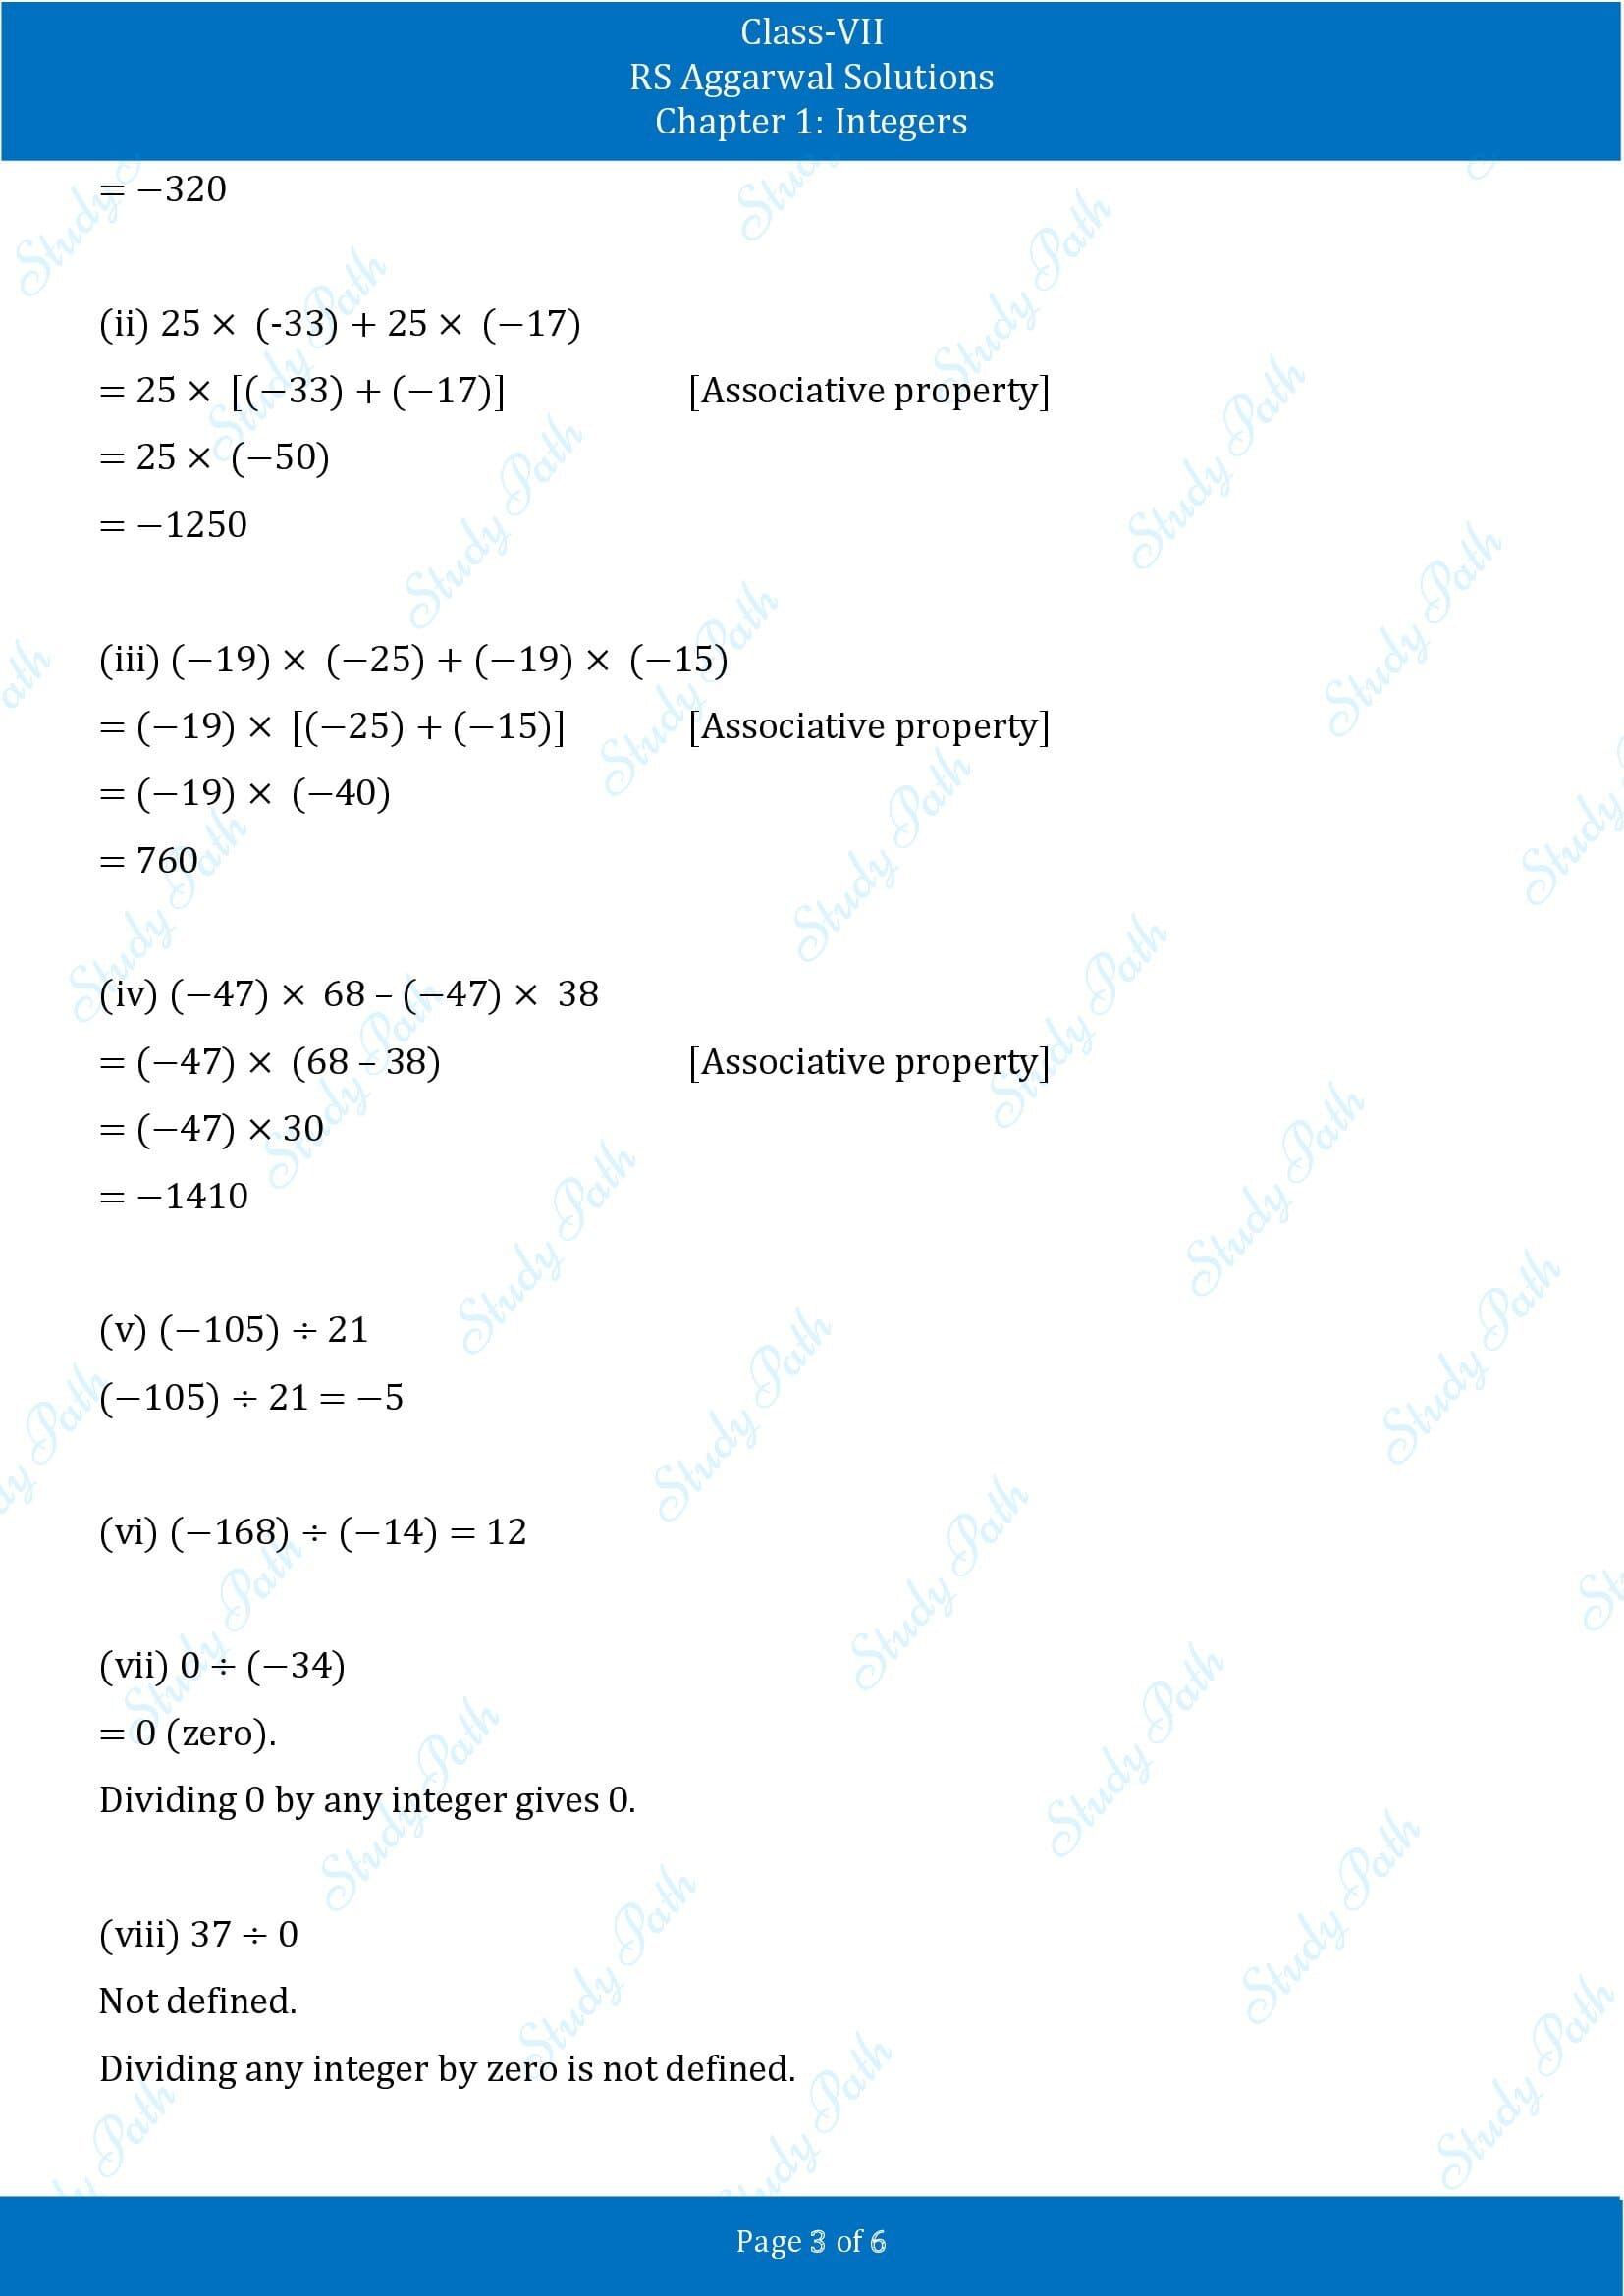 RS Aggarwal Solutions Class 7 Chapter 1 Integers Test Paper 00003